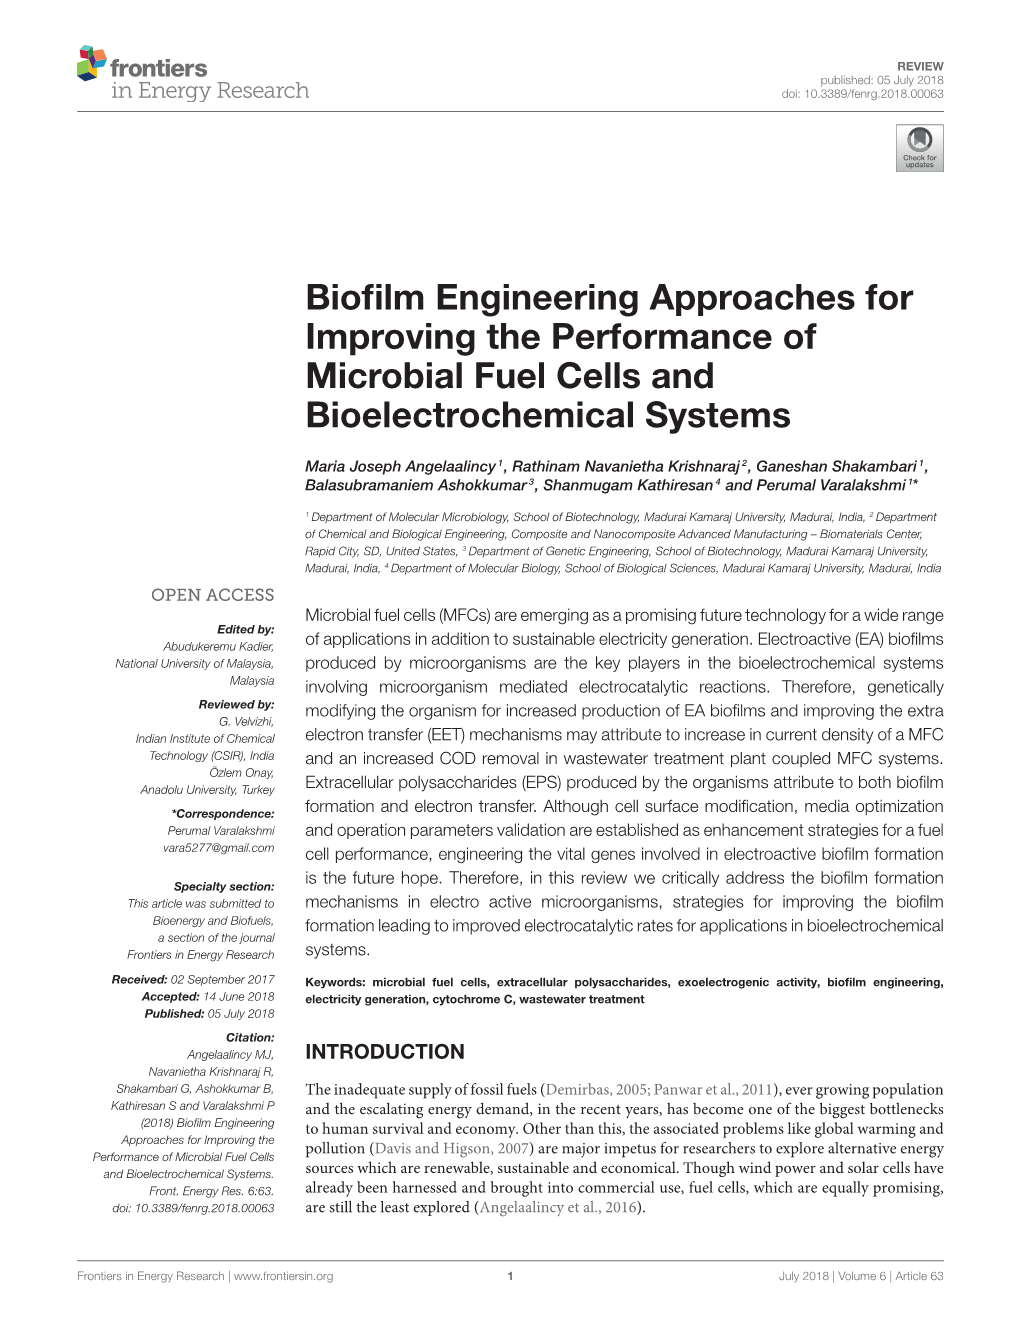 Biofilm Engineering Approaches for Improving the Performance Of